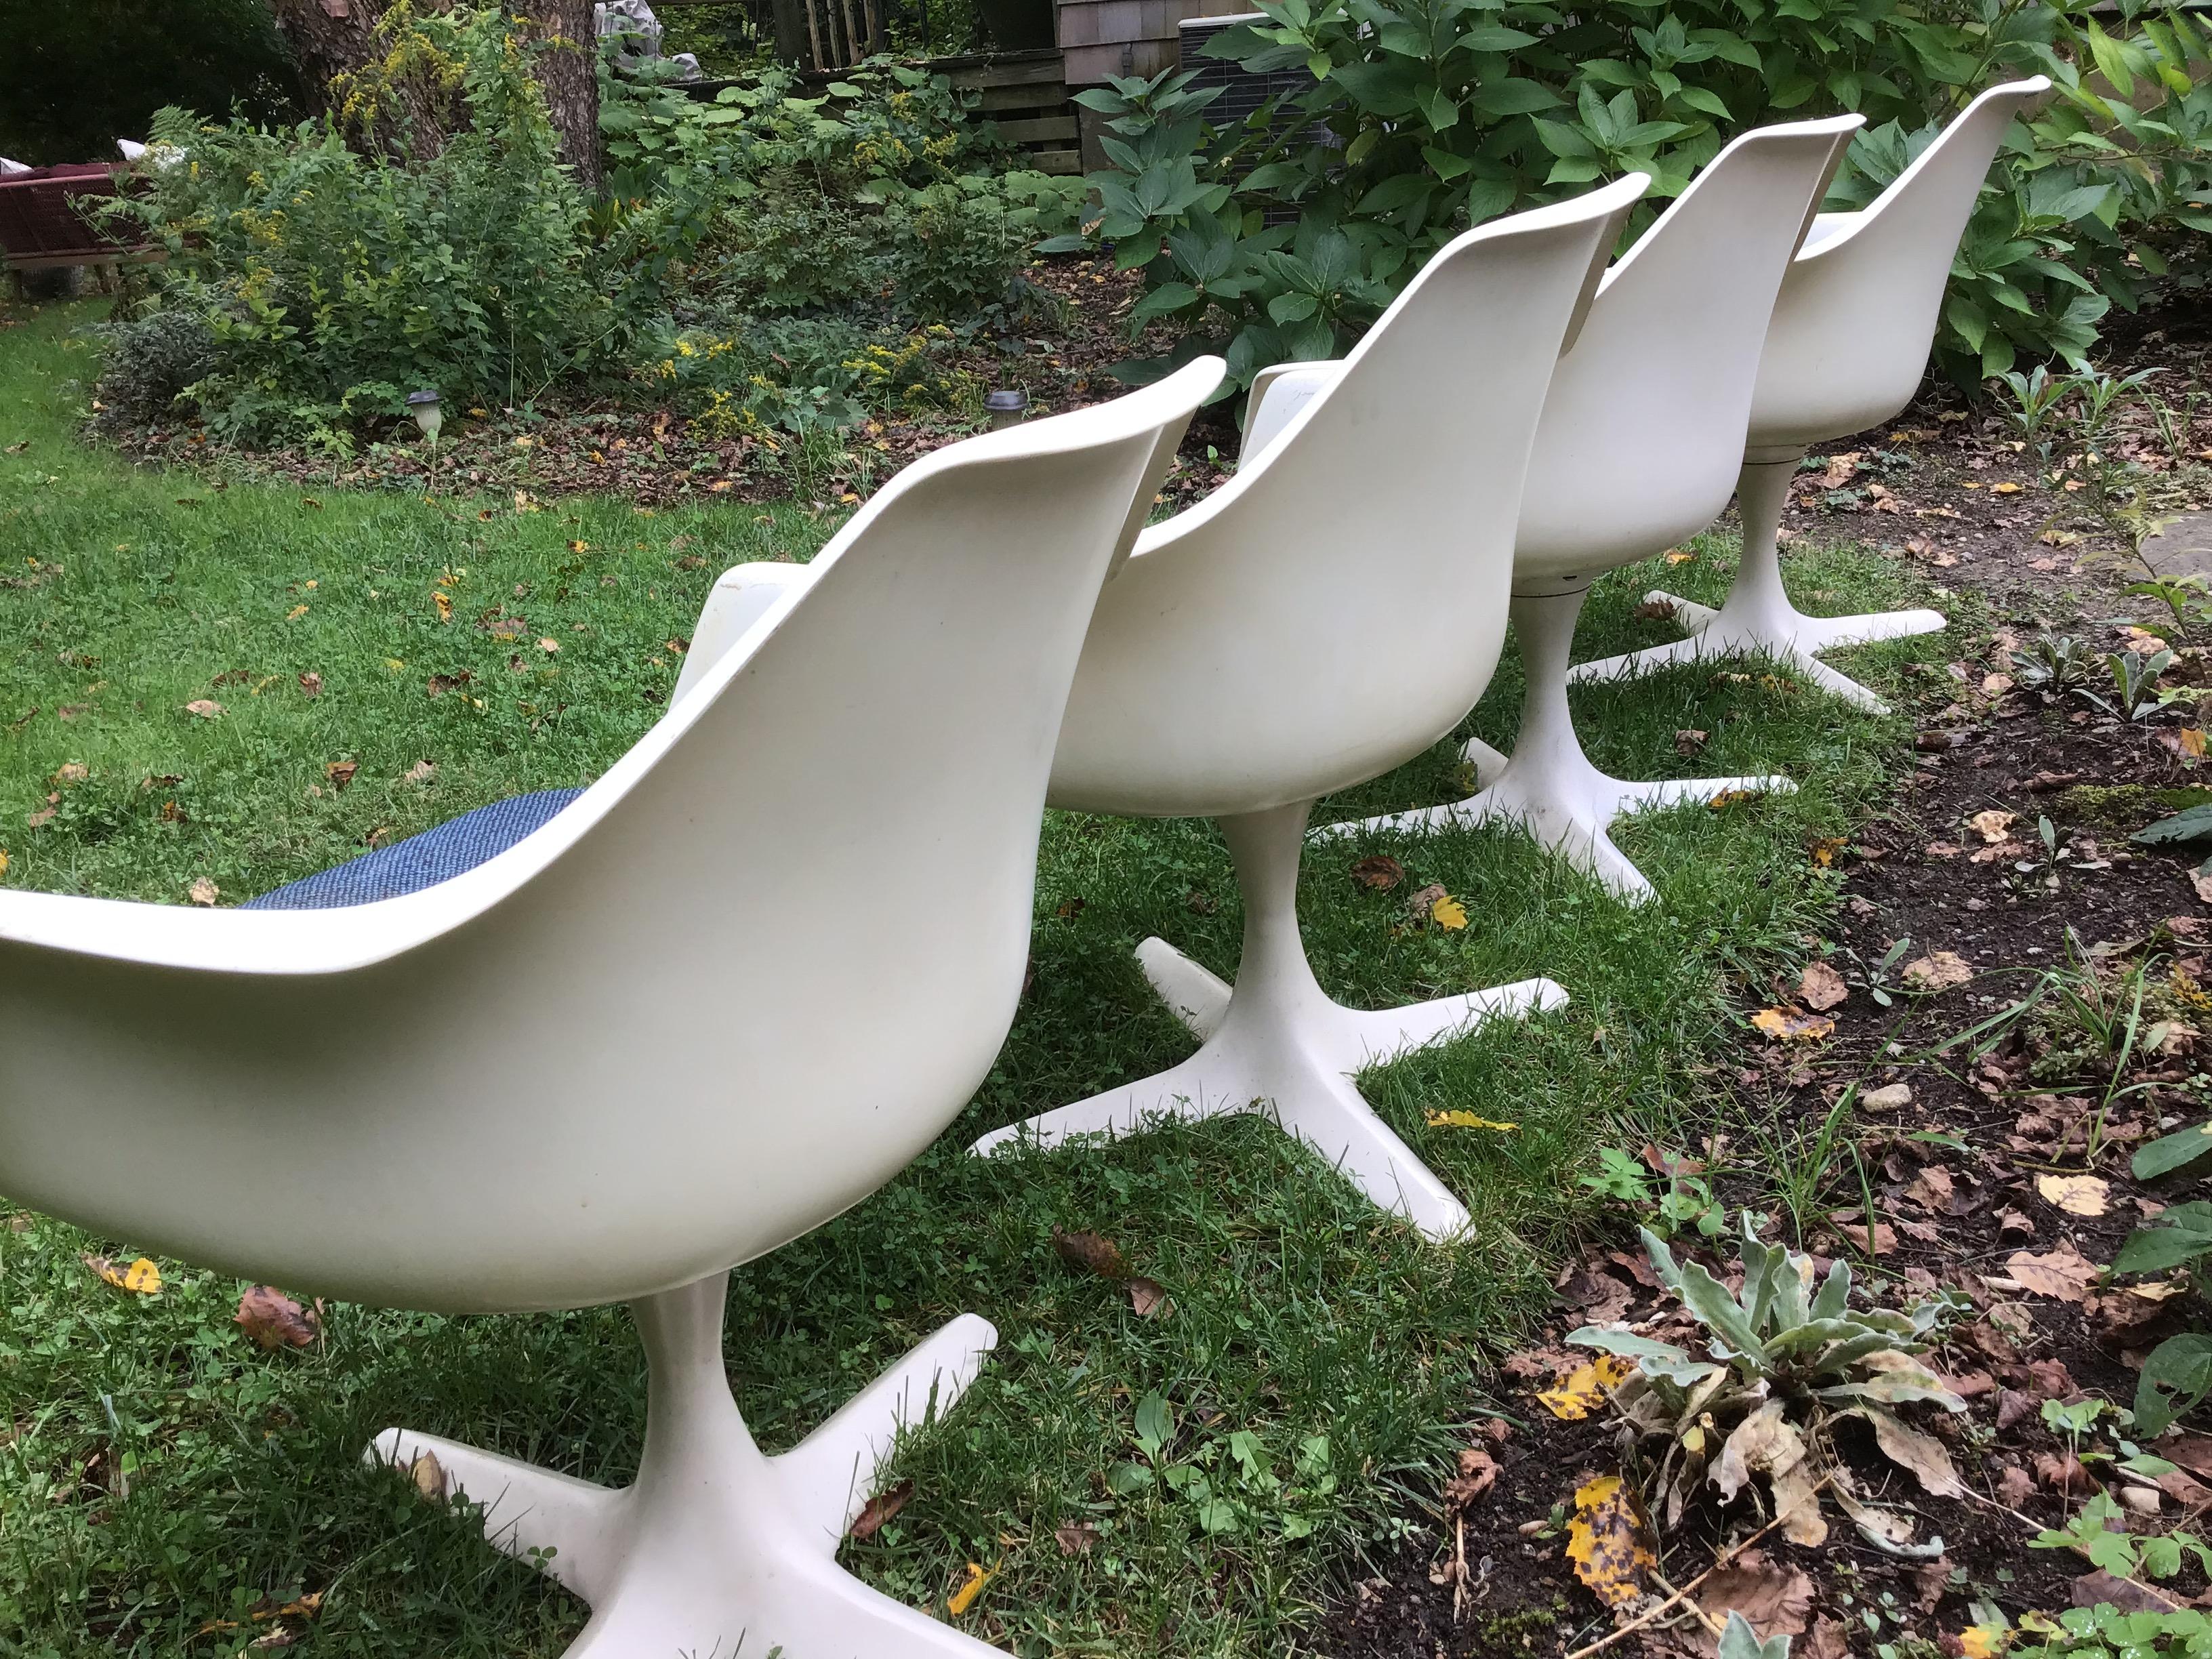 Burke tulip chairs, Burke armchairs, Mid century fiberglass armchairs,
Set of four, mid century dining chairs, vintage tulip chairs,

Chairs have lost their fiberglass shine, and there is wear on some arms and tops as shown in photos, seat cushions